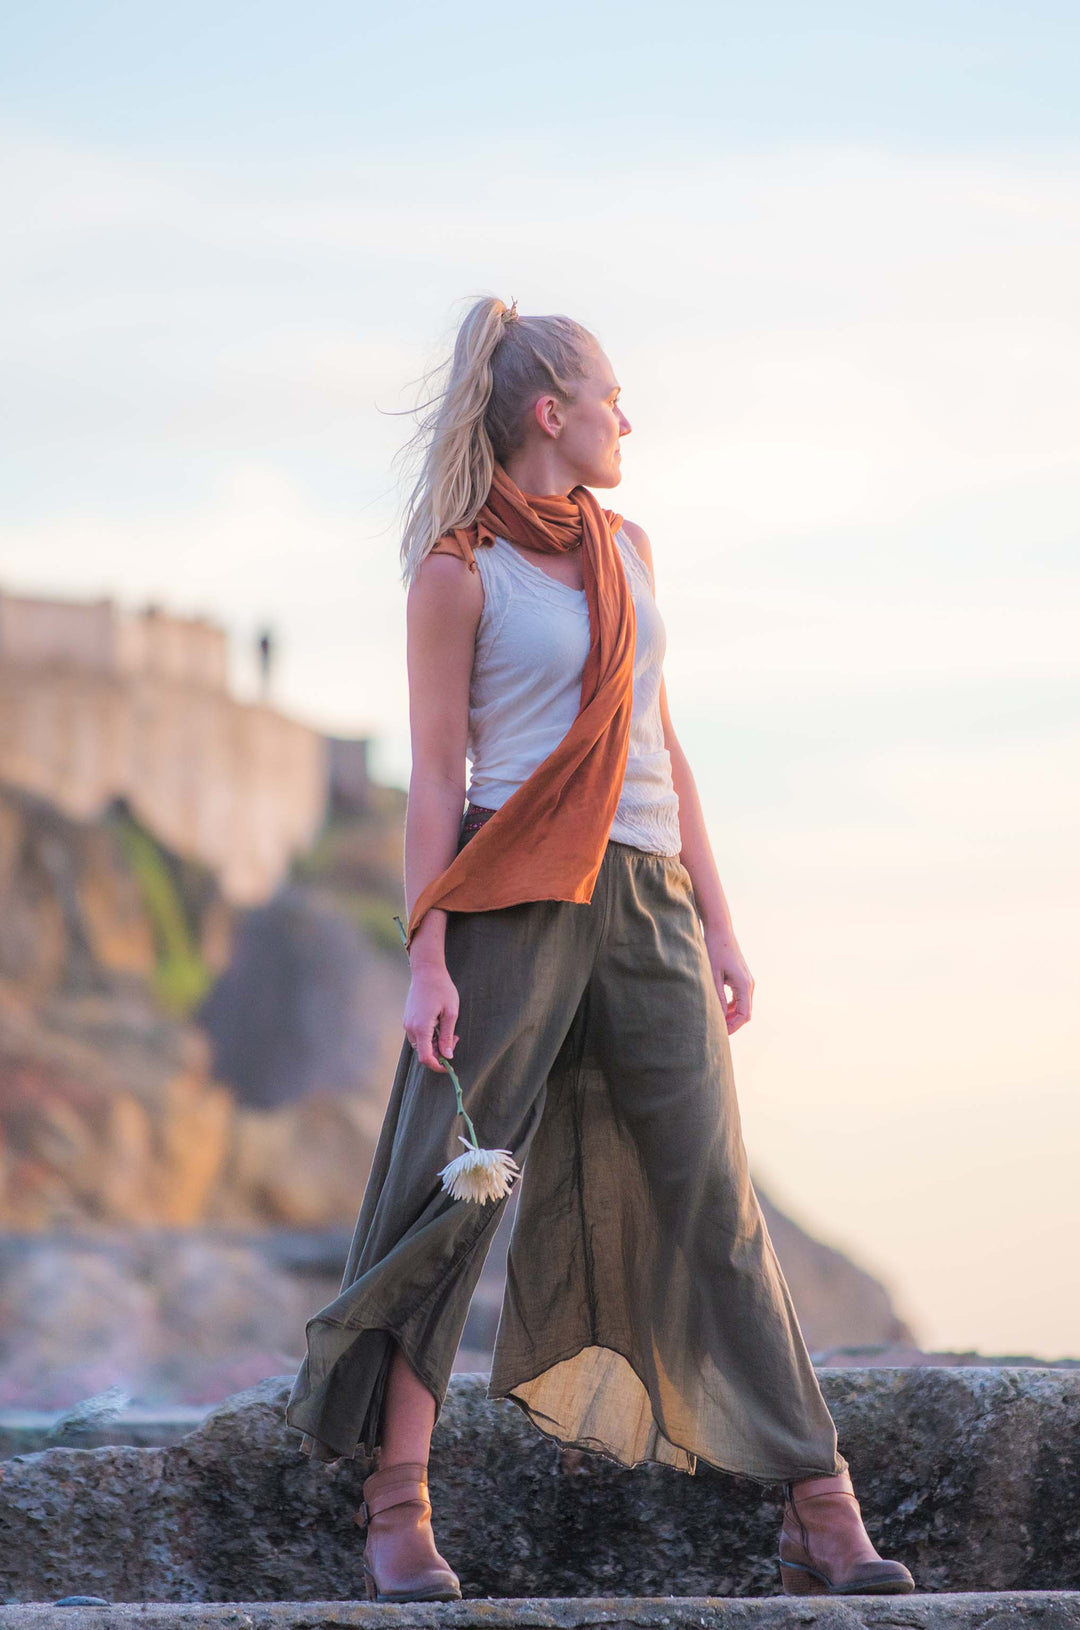 Model poses in un-dyed tank top and lightweight green pants. An orange scarf drapes around her next and down. She holds a flower in her right hand.